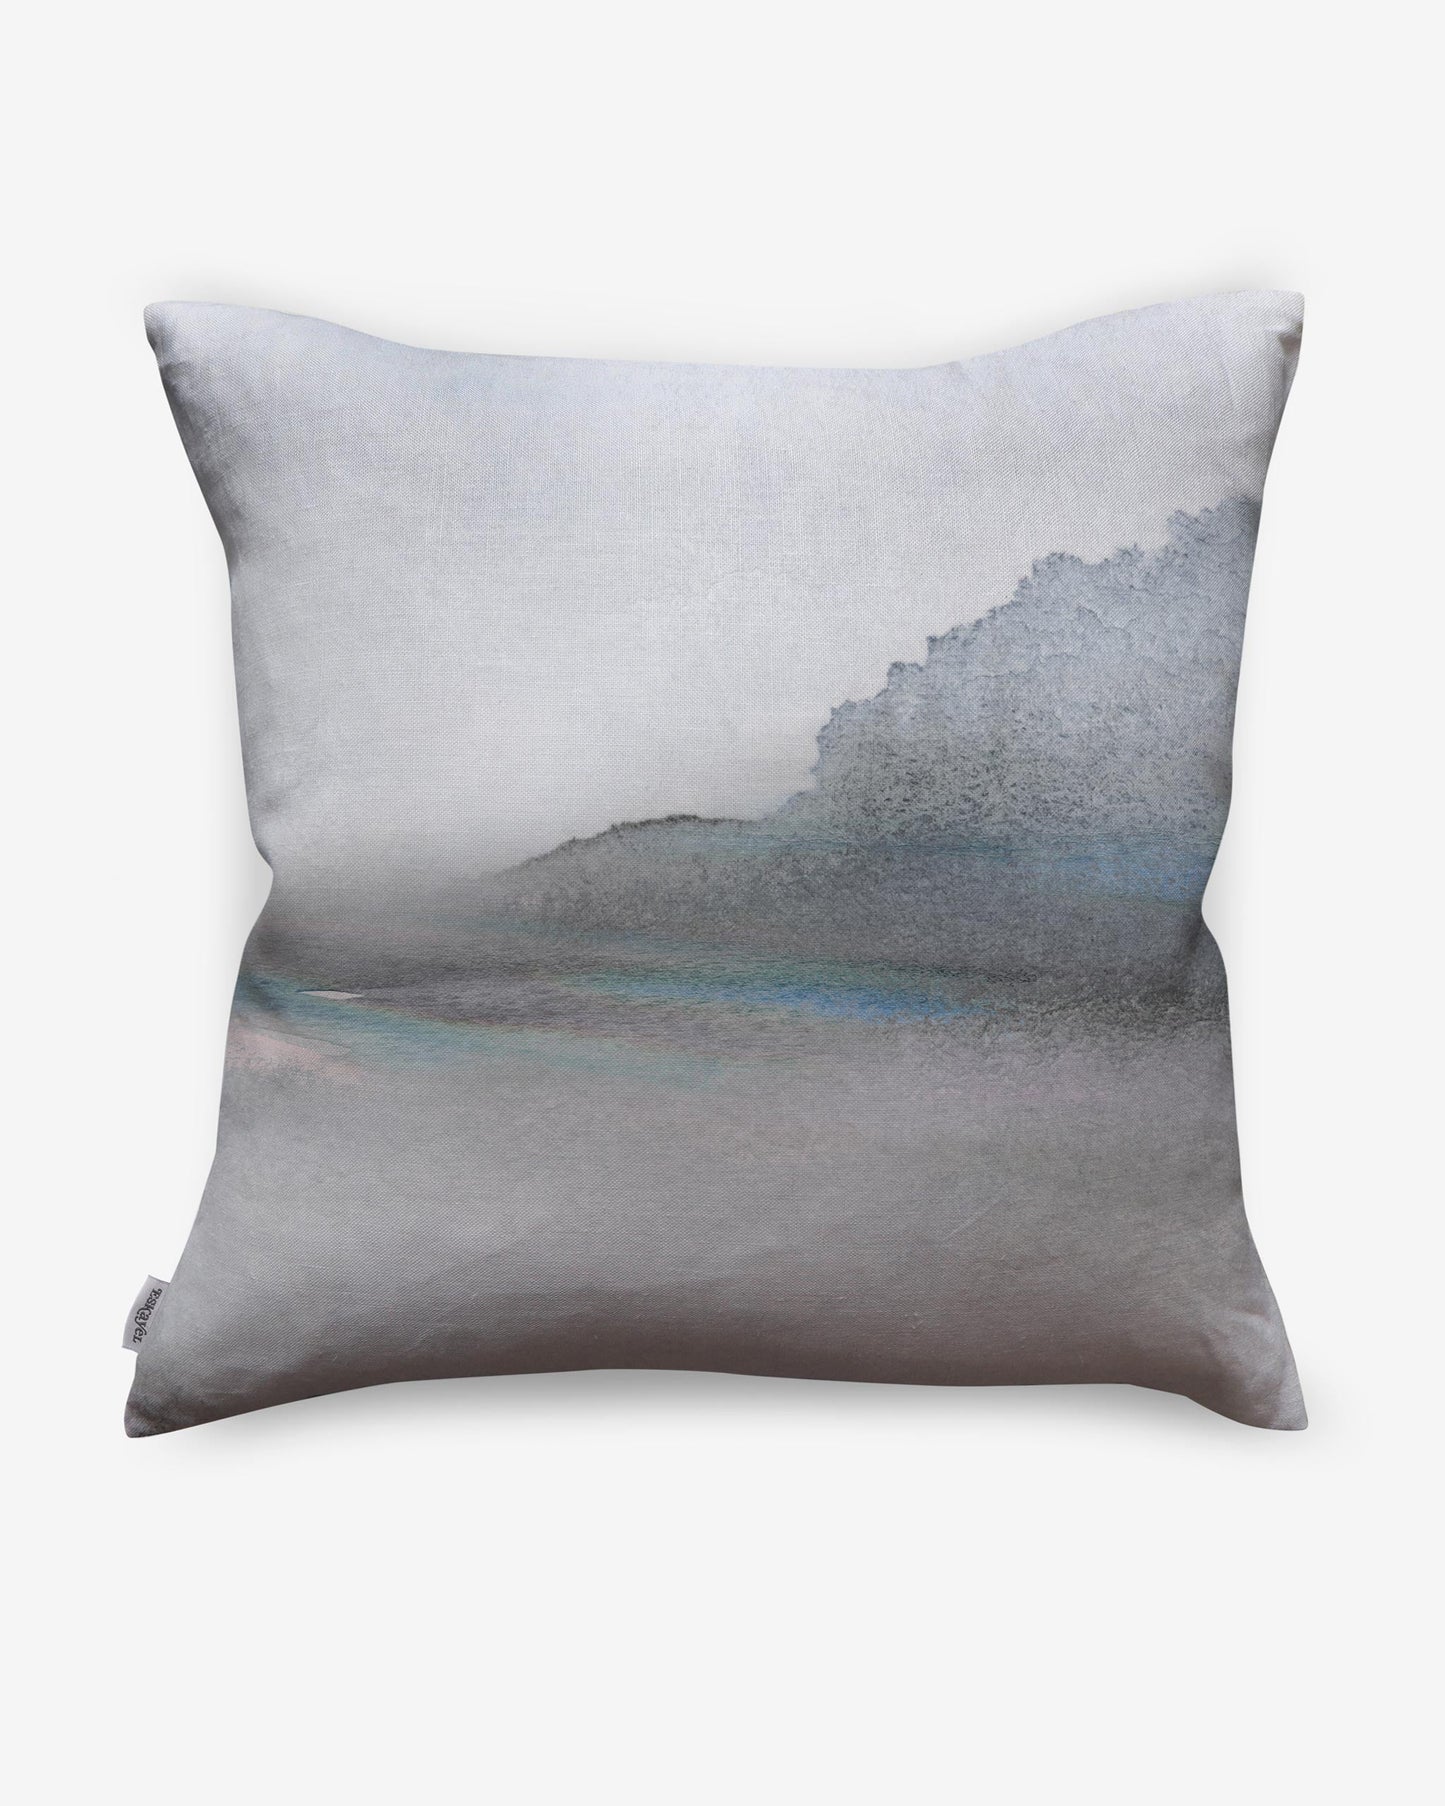 Lily's View Pillow||Dusk Two